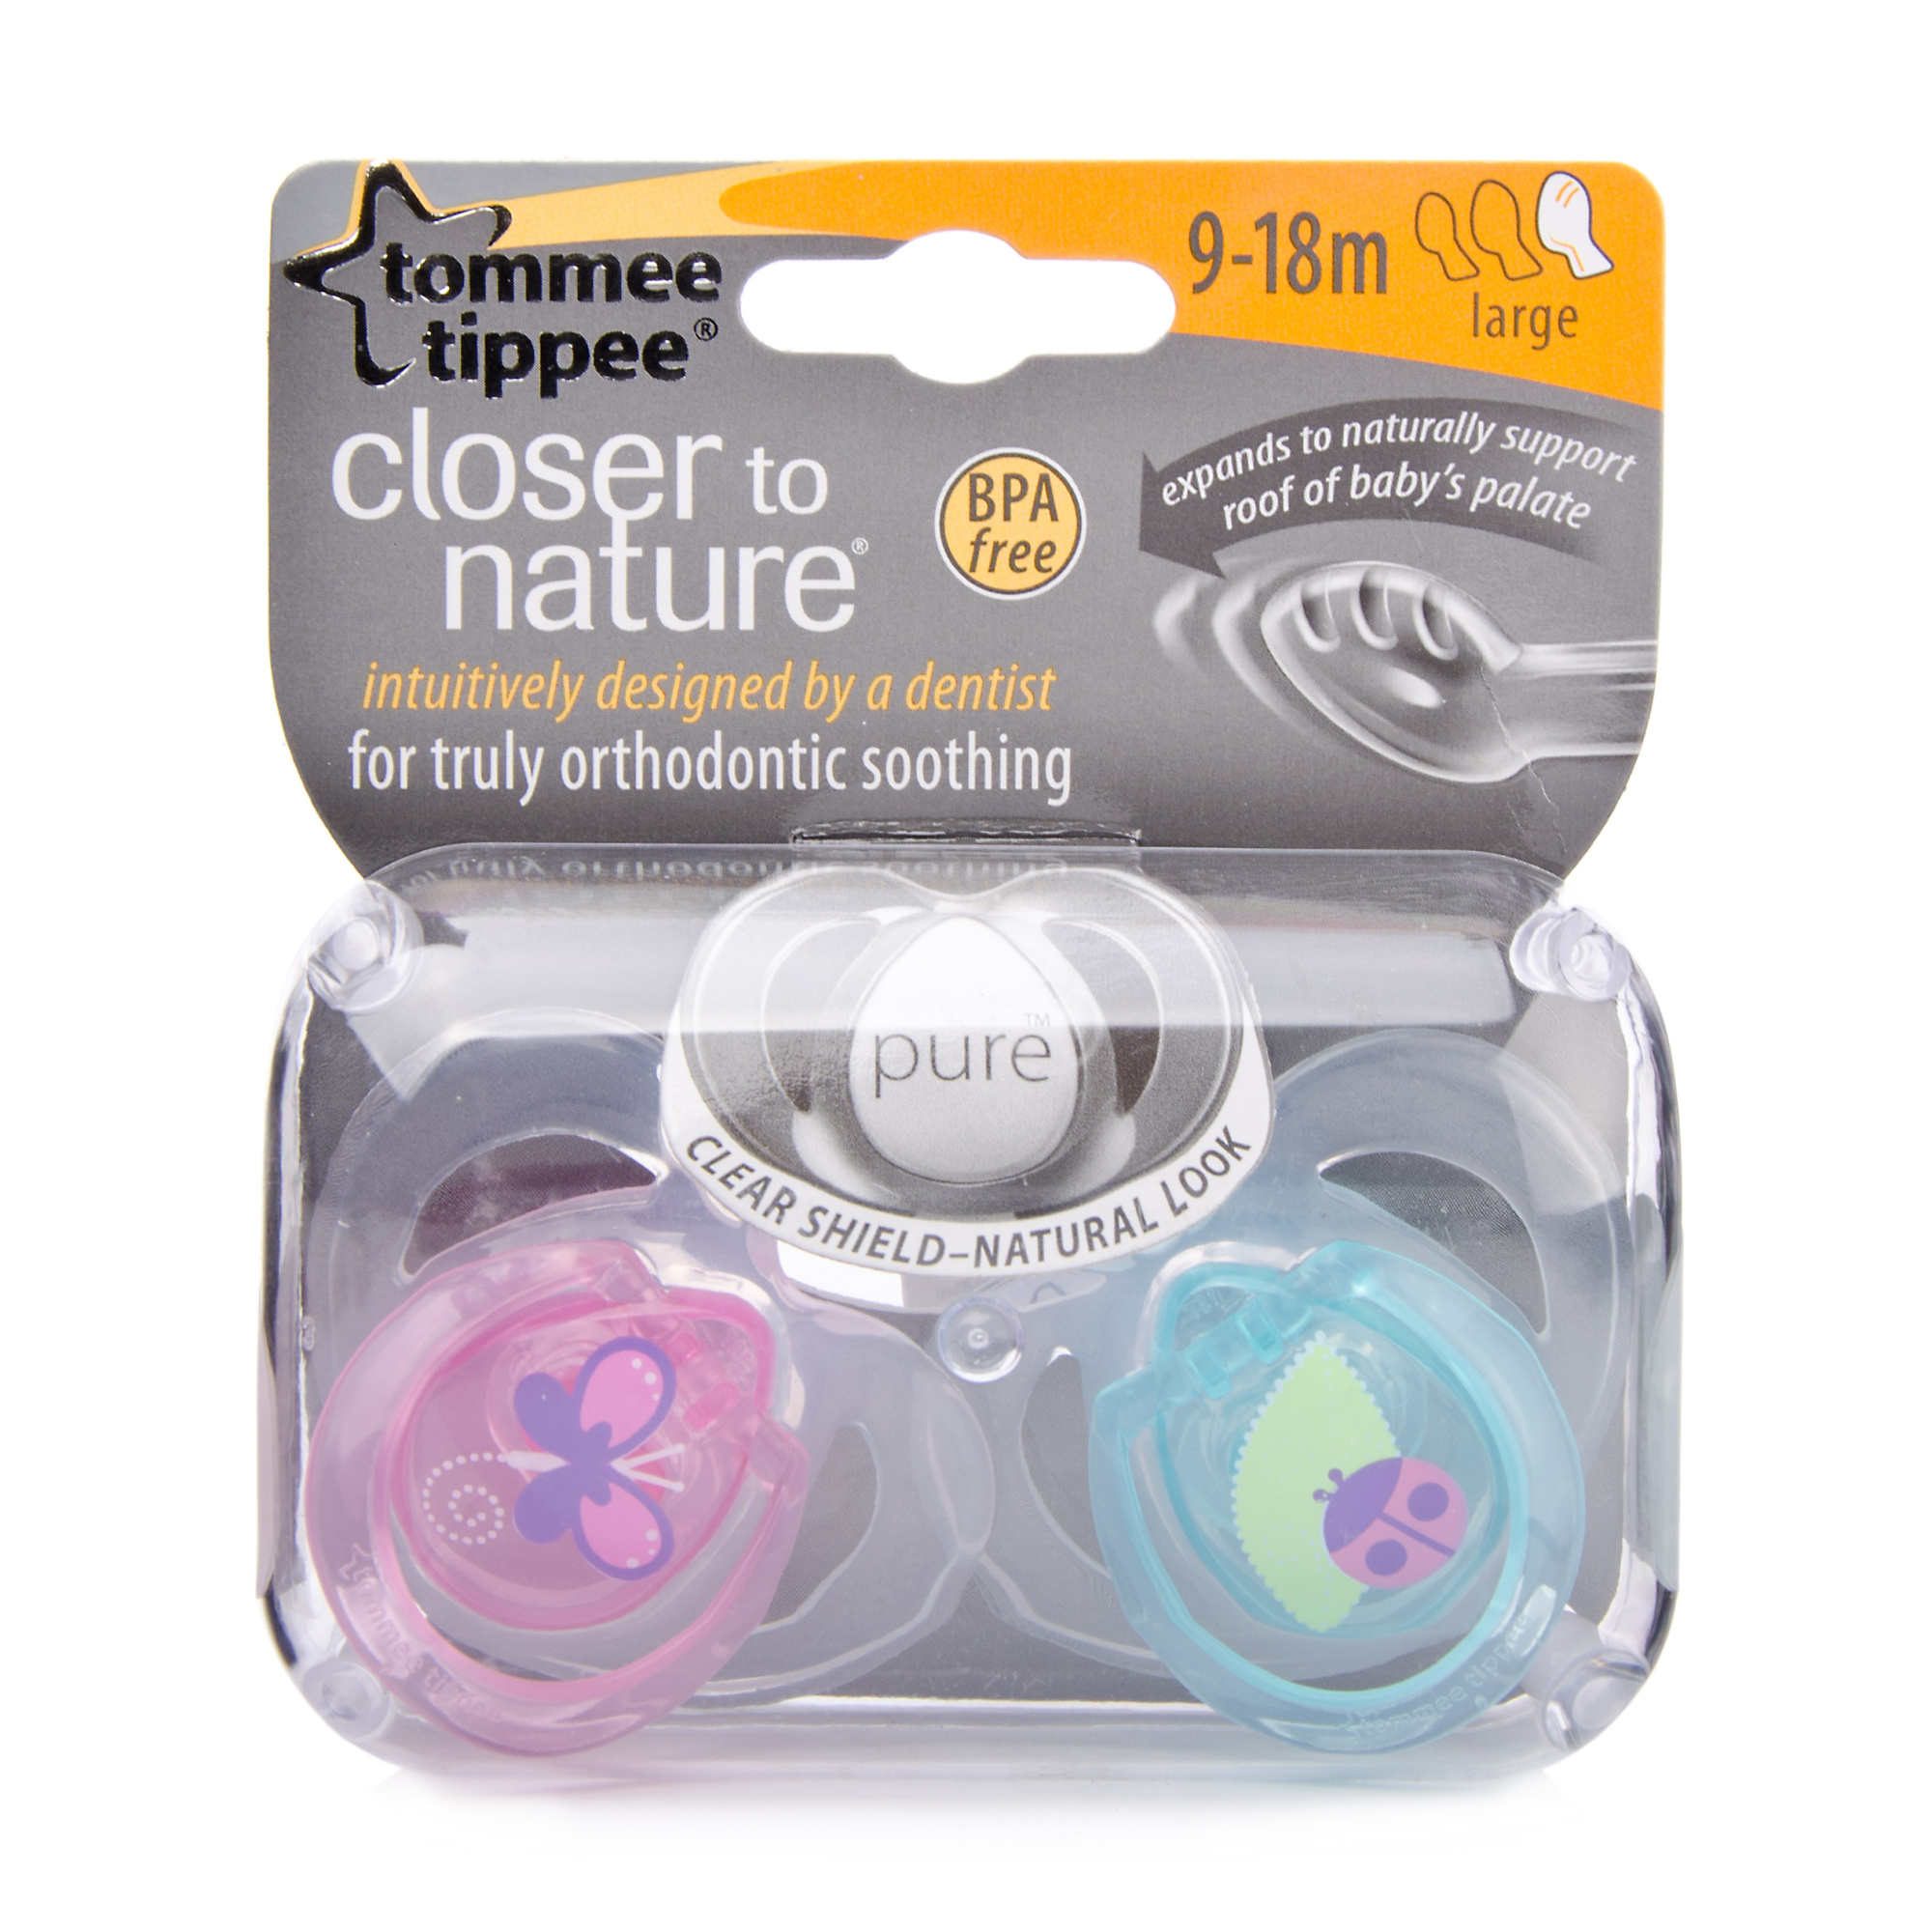 Tommee Tippee Closer to Nature Soothers 9-18months Girls | Chemist Direct